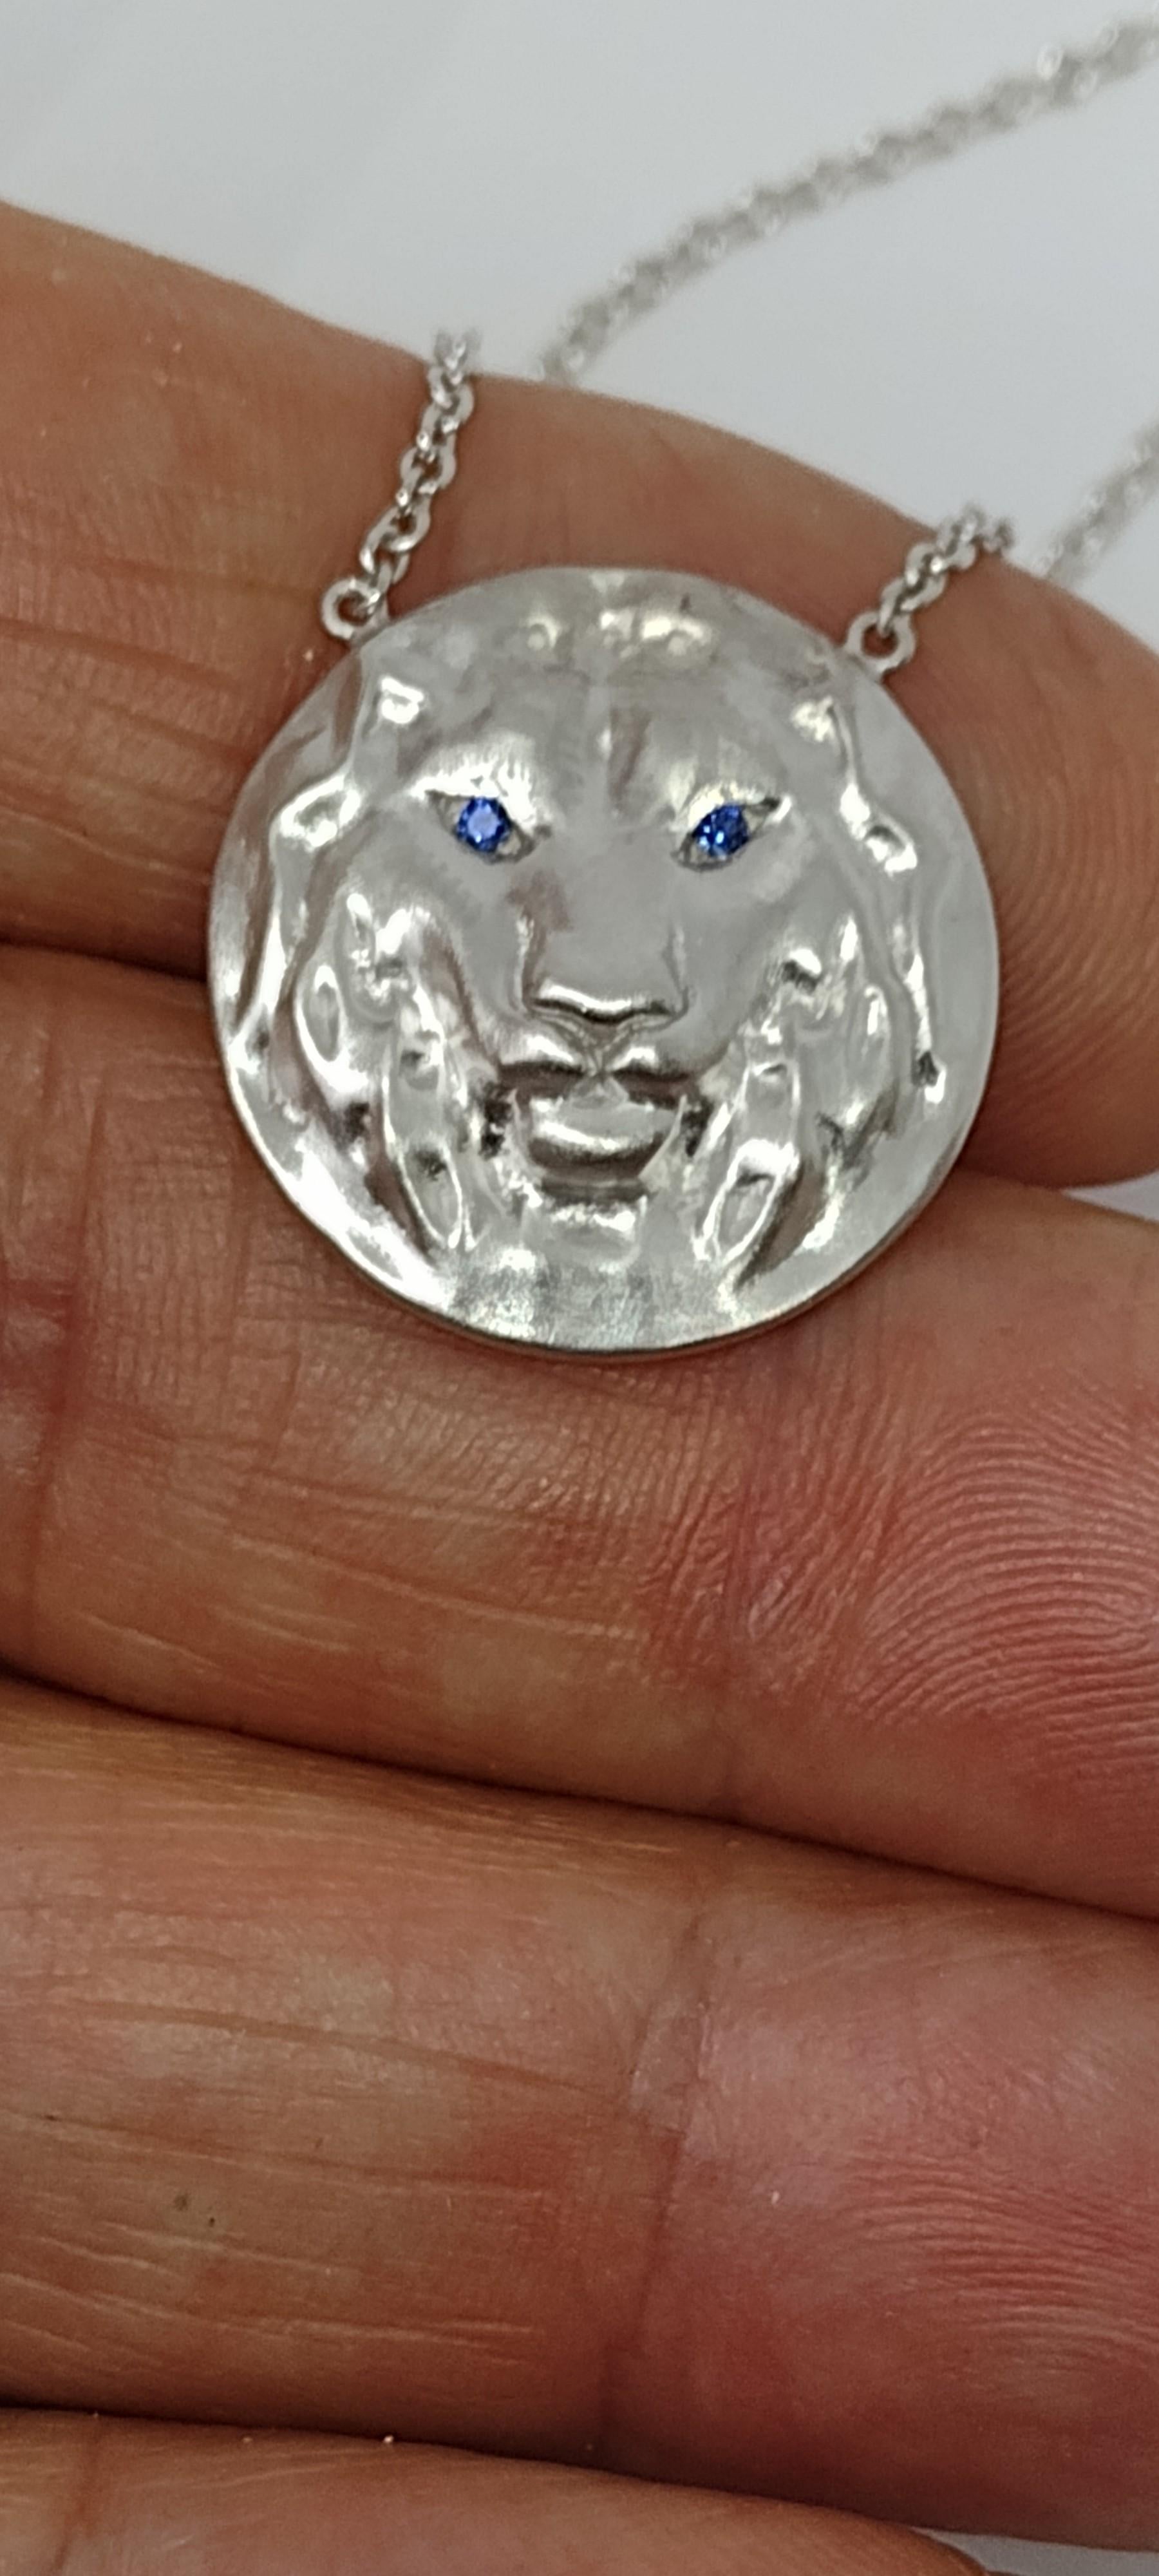 Tiffany designer , Thomas Kurilla created this 14k White Gold Lion Pendant,  Matte finish, 21 mm diameter x 5.4 high on a 18 inch chain 1.5 mm wide. 1.4 mm sapphire eyes . This chain is for women. It is too fine for men.

 I would recommend a 1.7